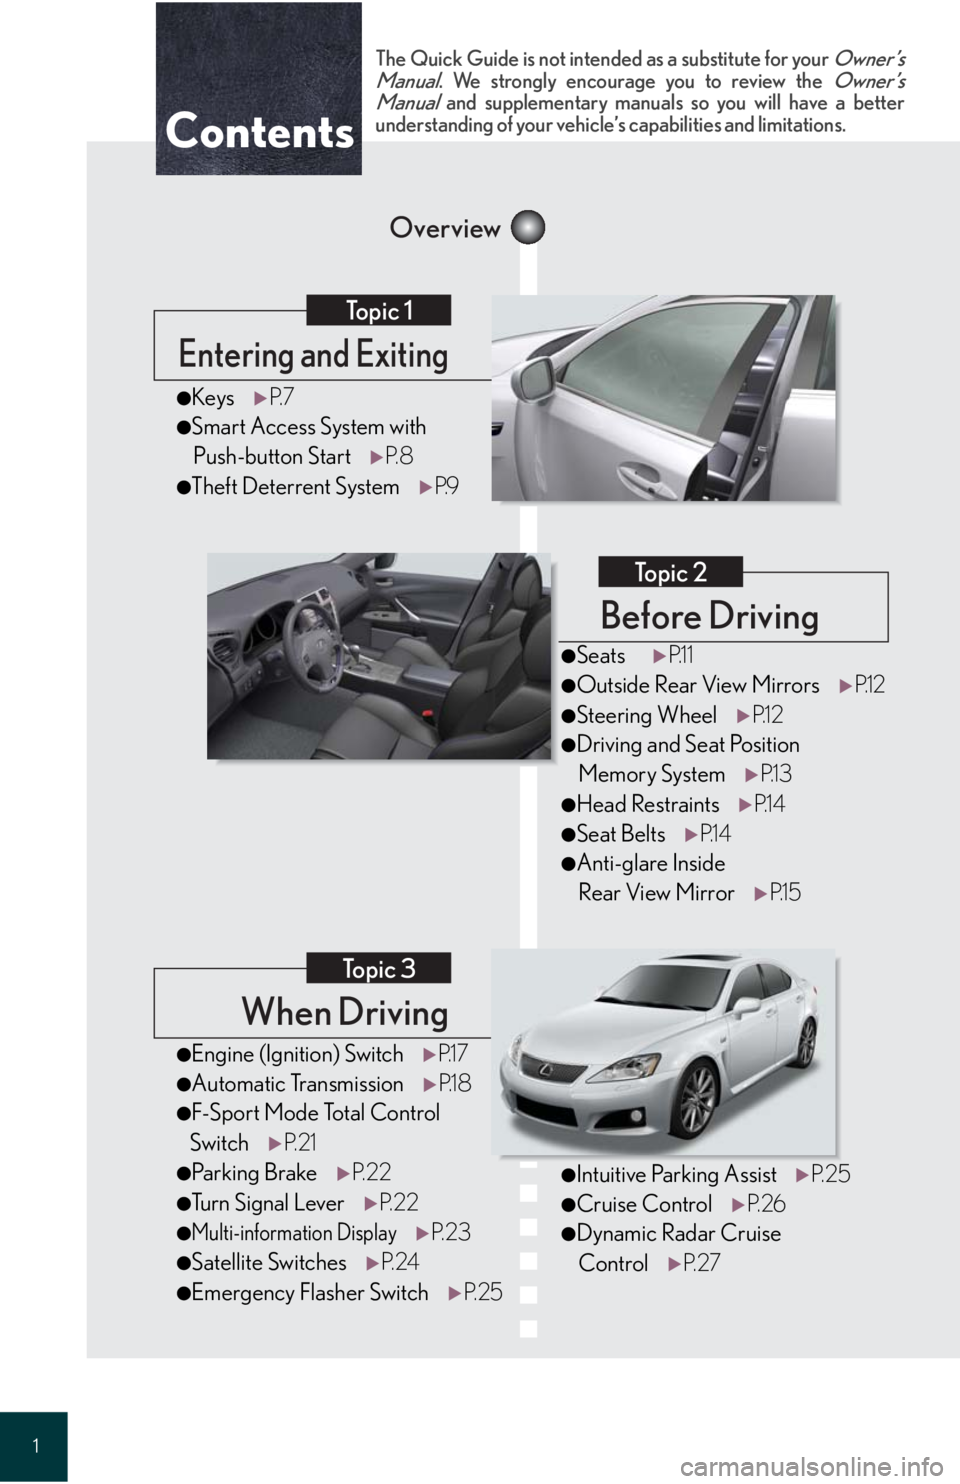 Lexus IS F 2008  Do-It-Yourself Maintenance / LEXUS 2008 IS F QUICK GUIDE OWNERS MANUAL (OM53613U) 1
When Driving
Topic 3
Entering and Exiting
Topic 1
Before Driving
Topic 2
Overview
Contents
●Engine (Ignition) SwitchP.1 7
●Automatic TransmissionP.1 8
●F-Sport Mode Total Control 
SwitchP. 2 1